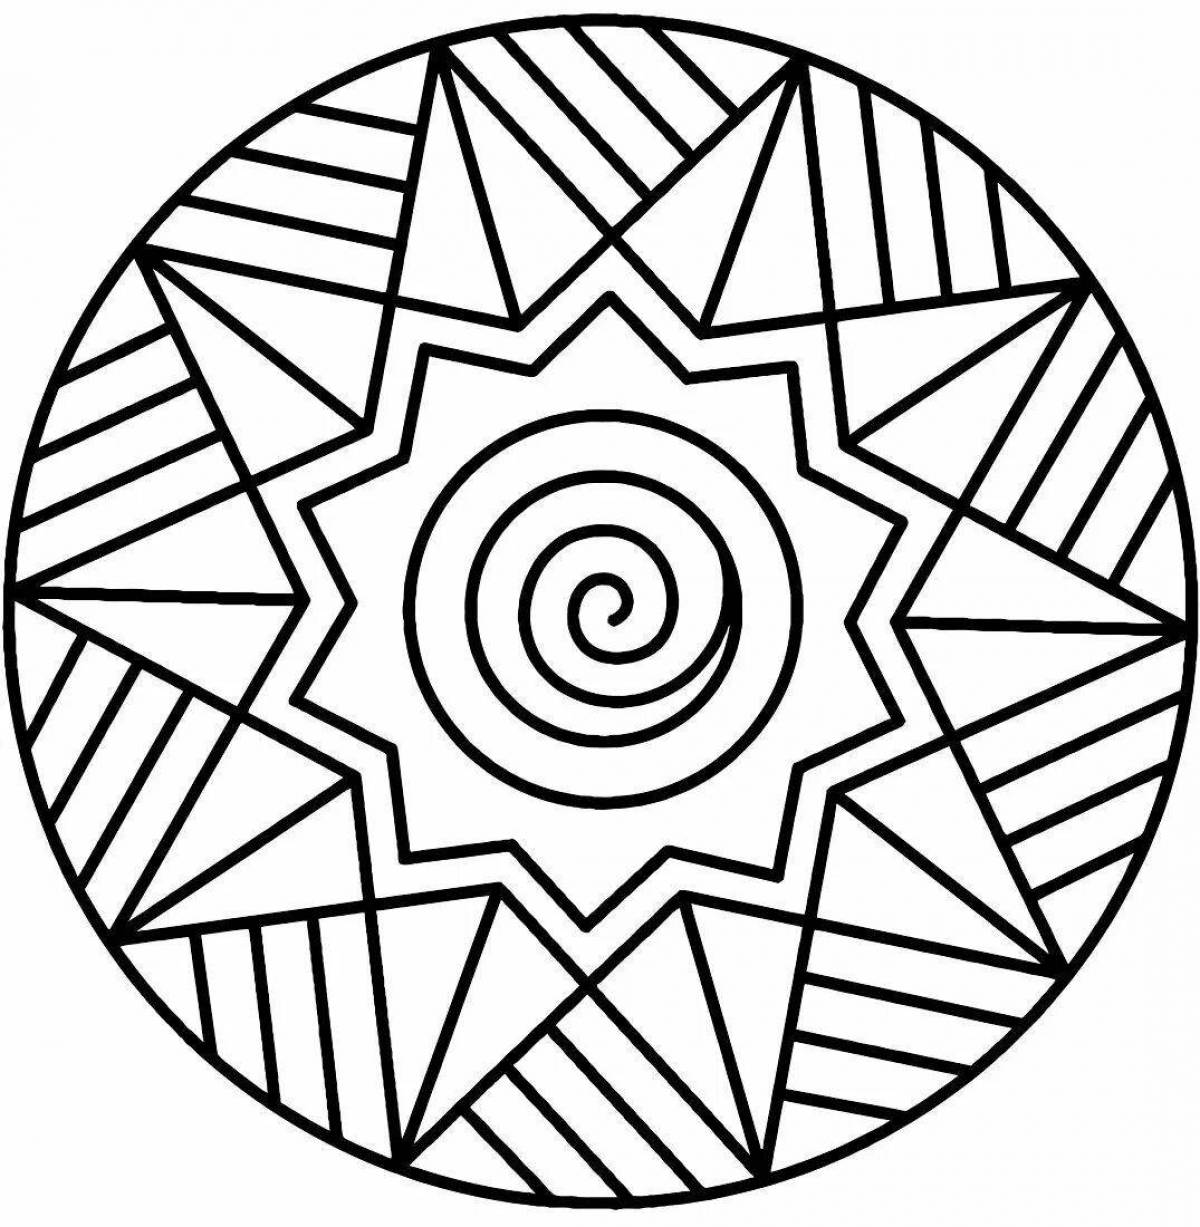 Adorable light pattern coloring page